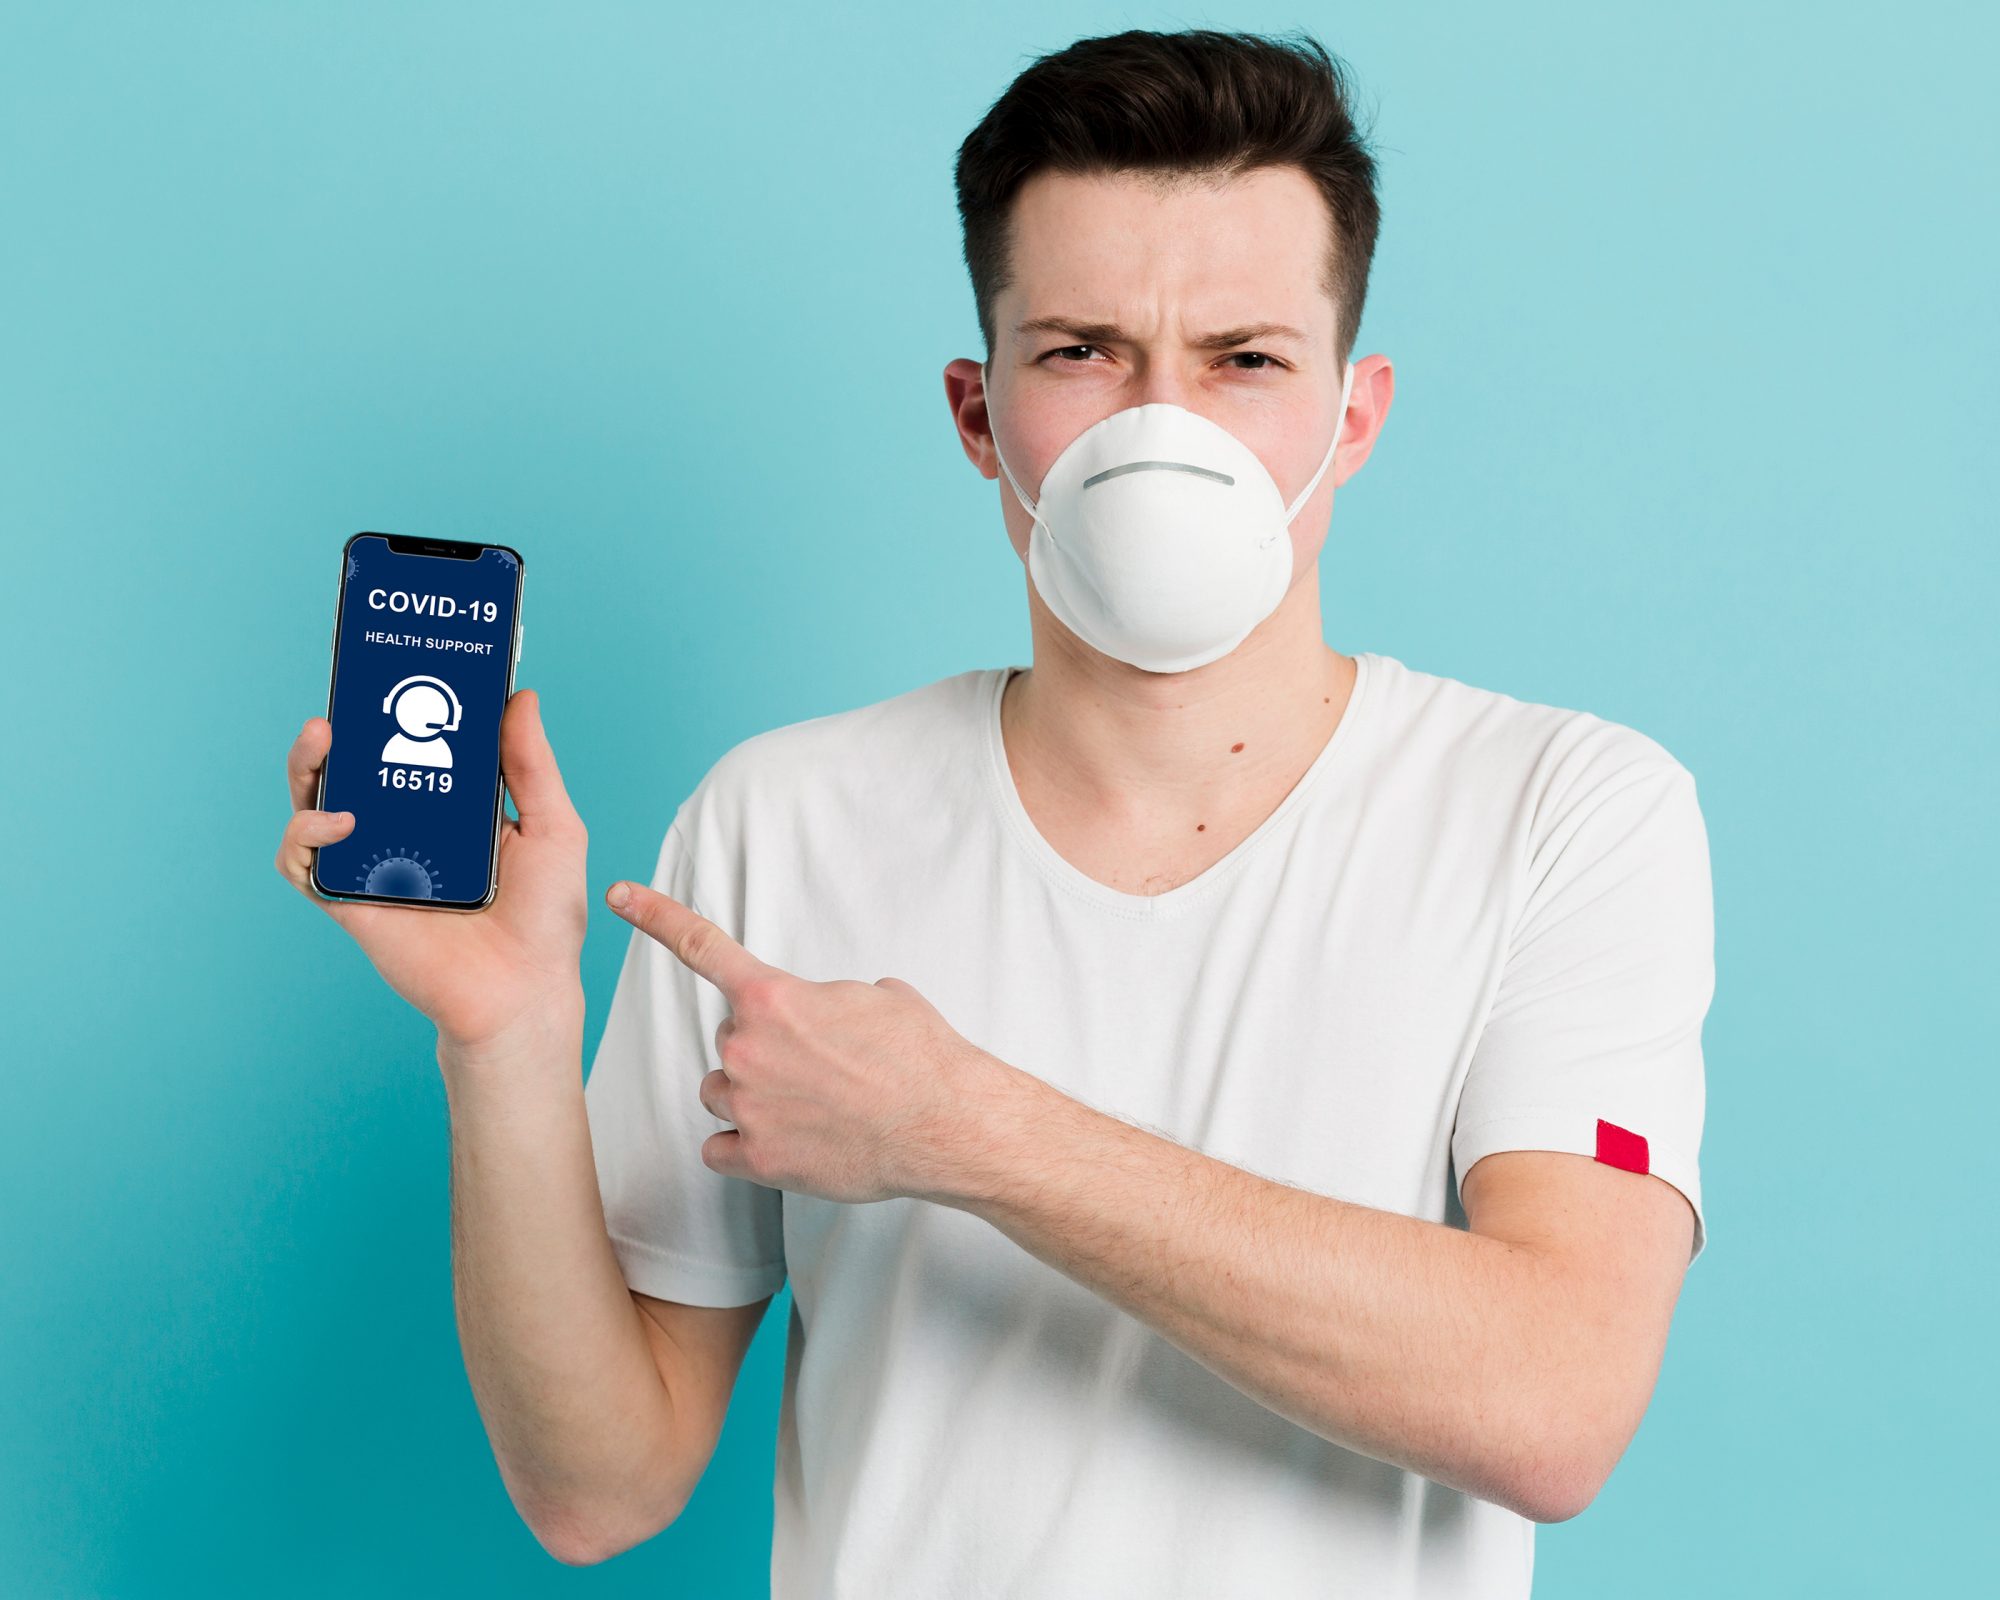 Man with a face mask holding an iPhone mockup